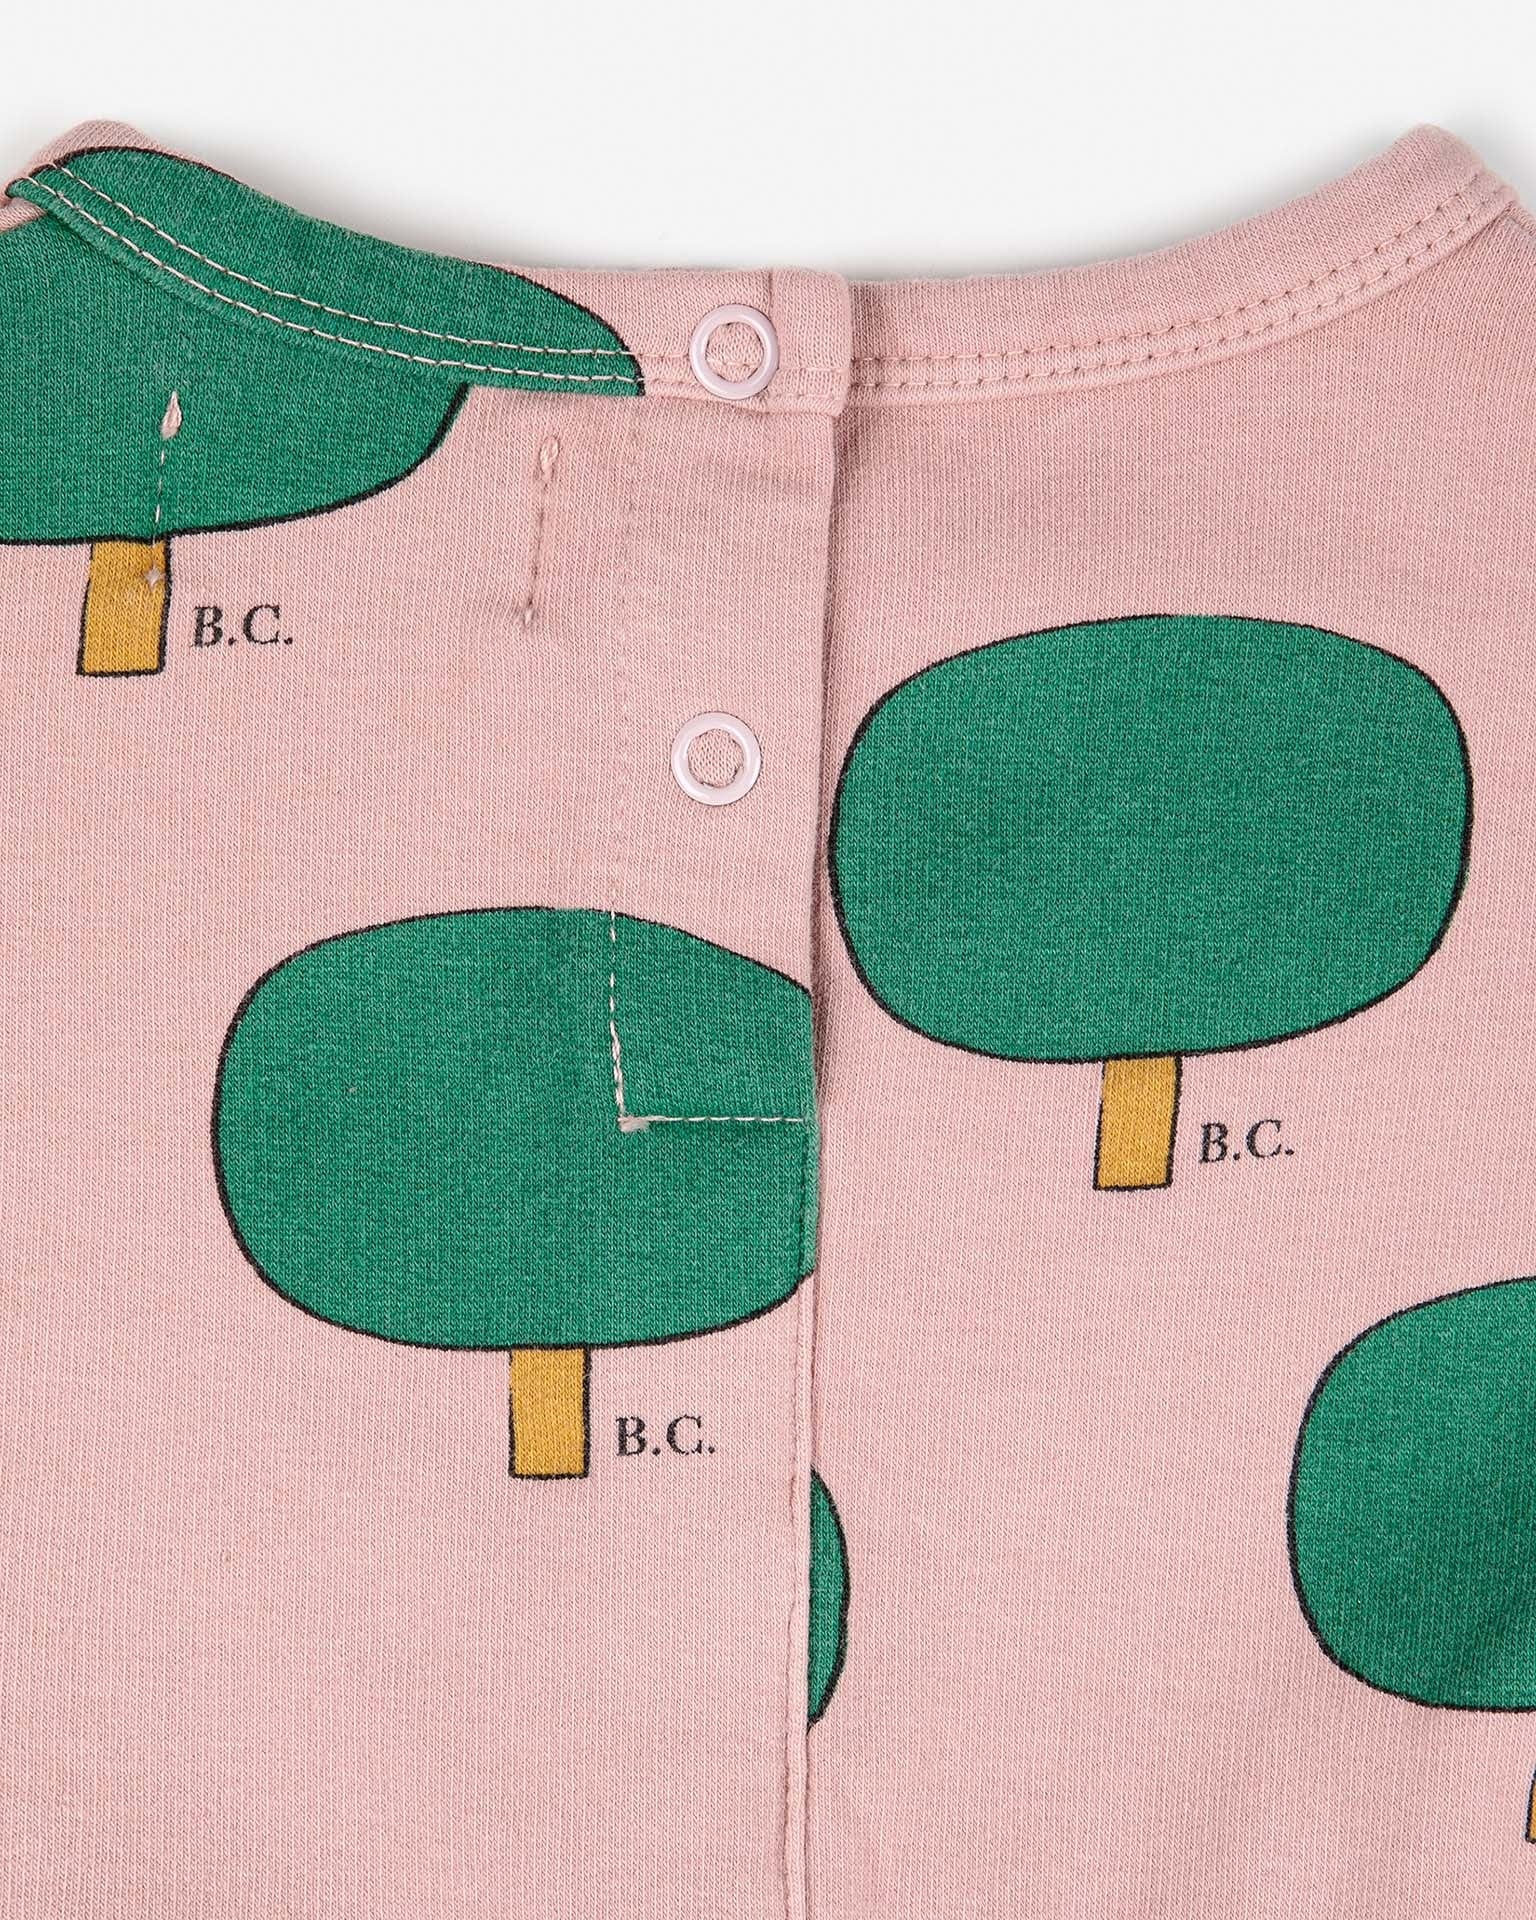 green tree all over baby dress